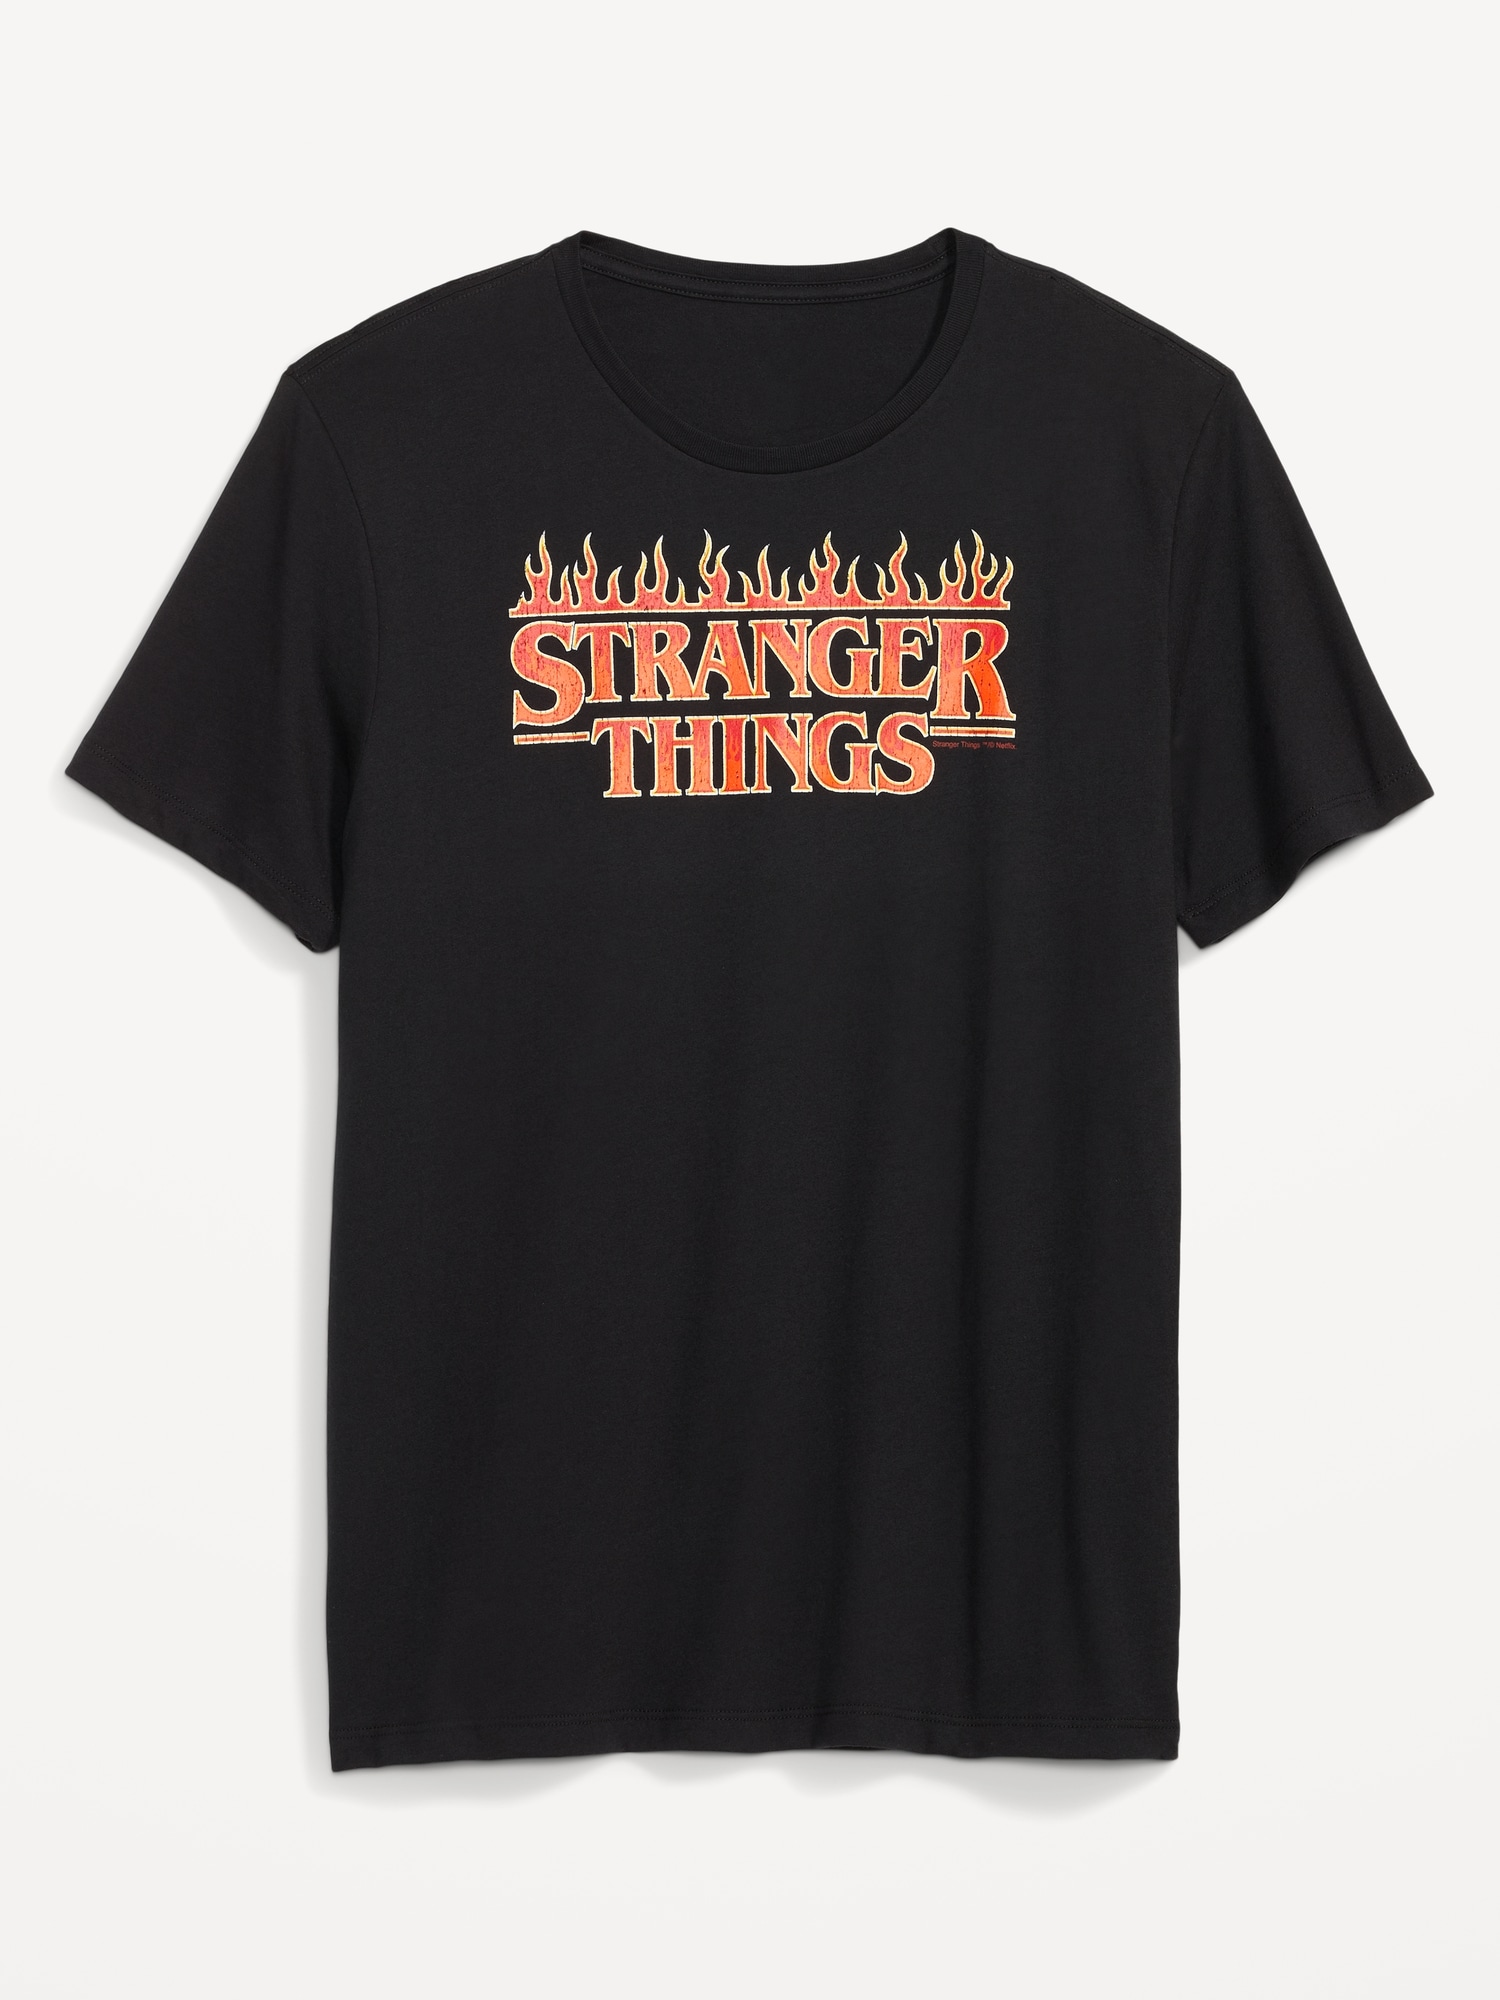 Stranger Things™ Gender-Neutral Graphic T-Shirt for Adults | Old Navy